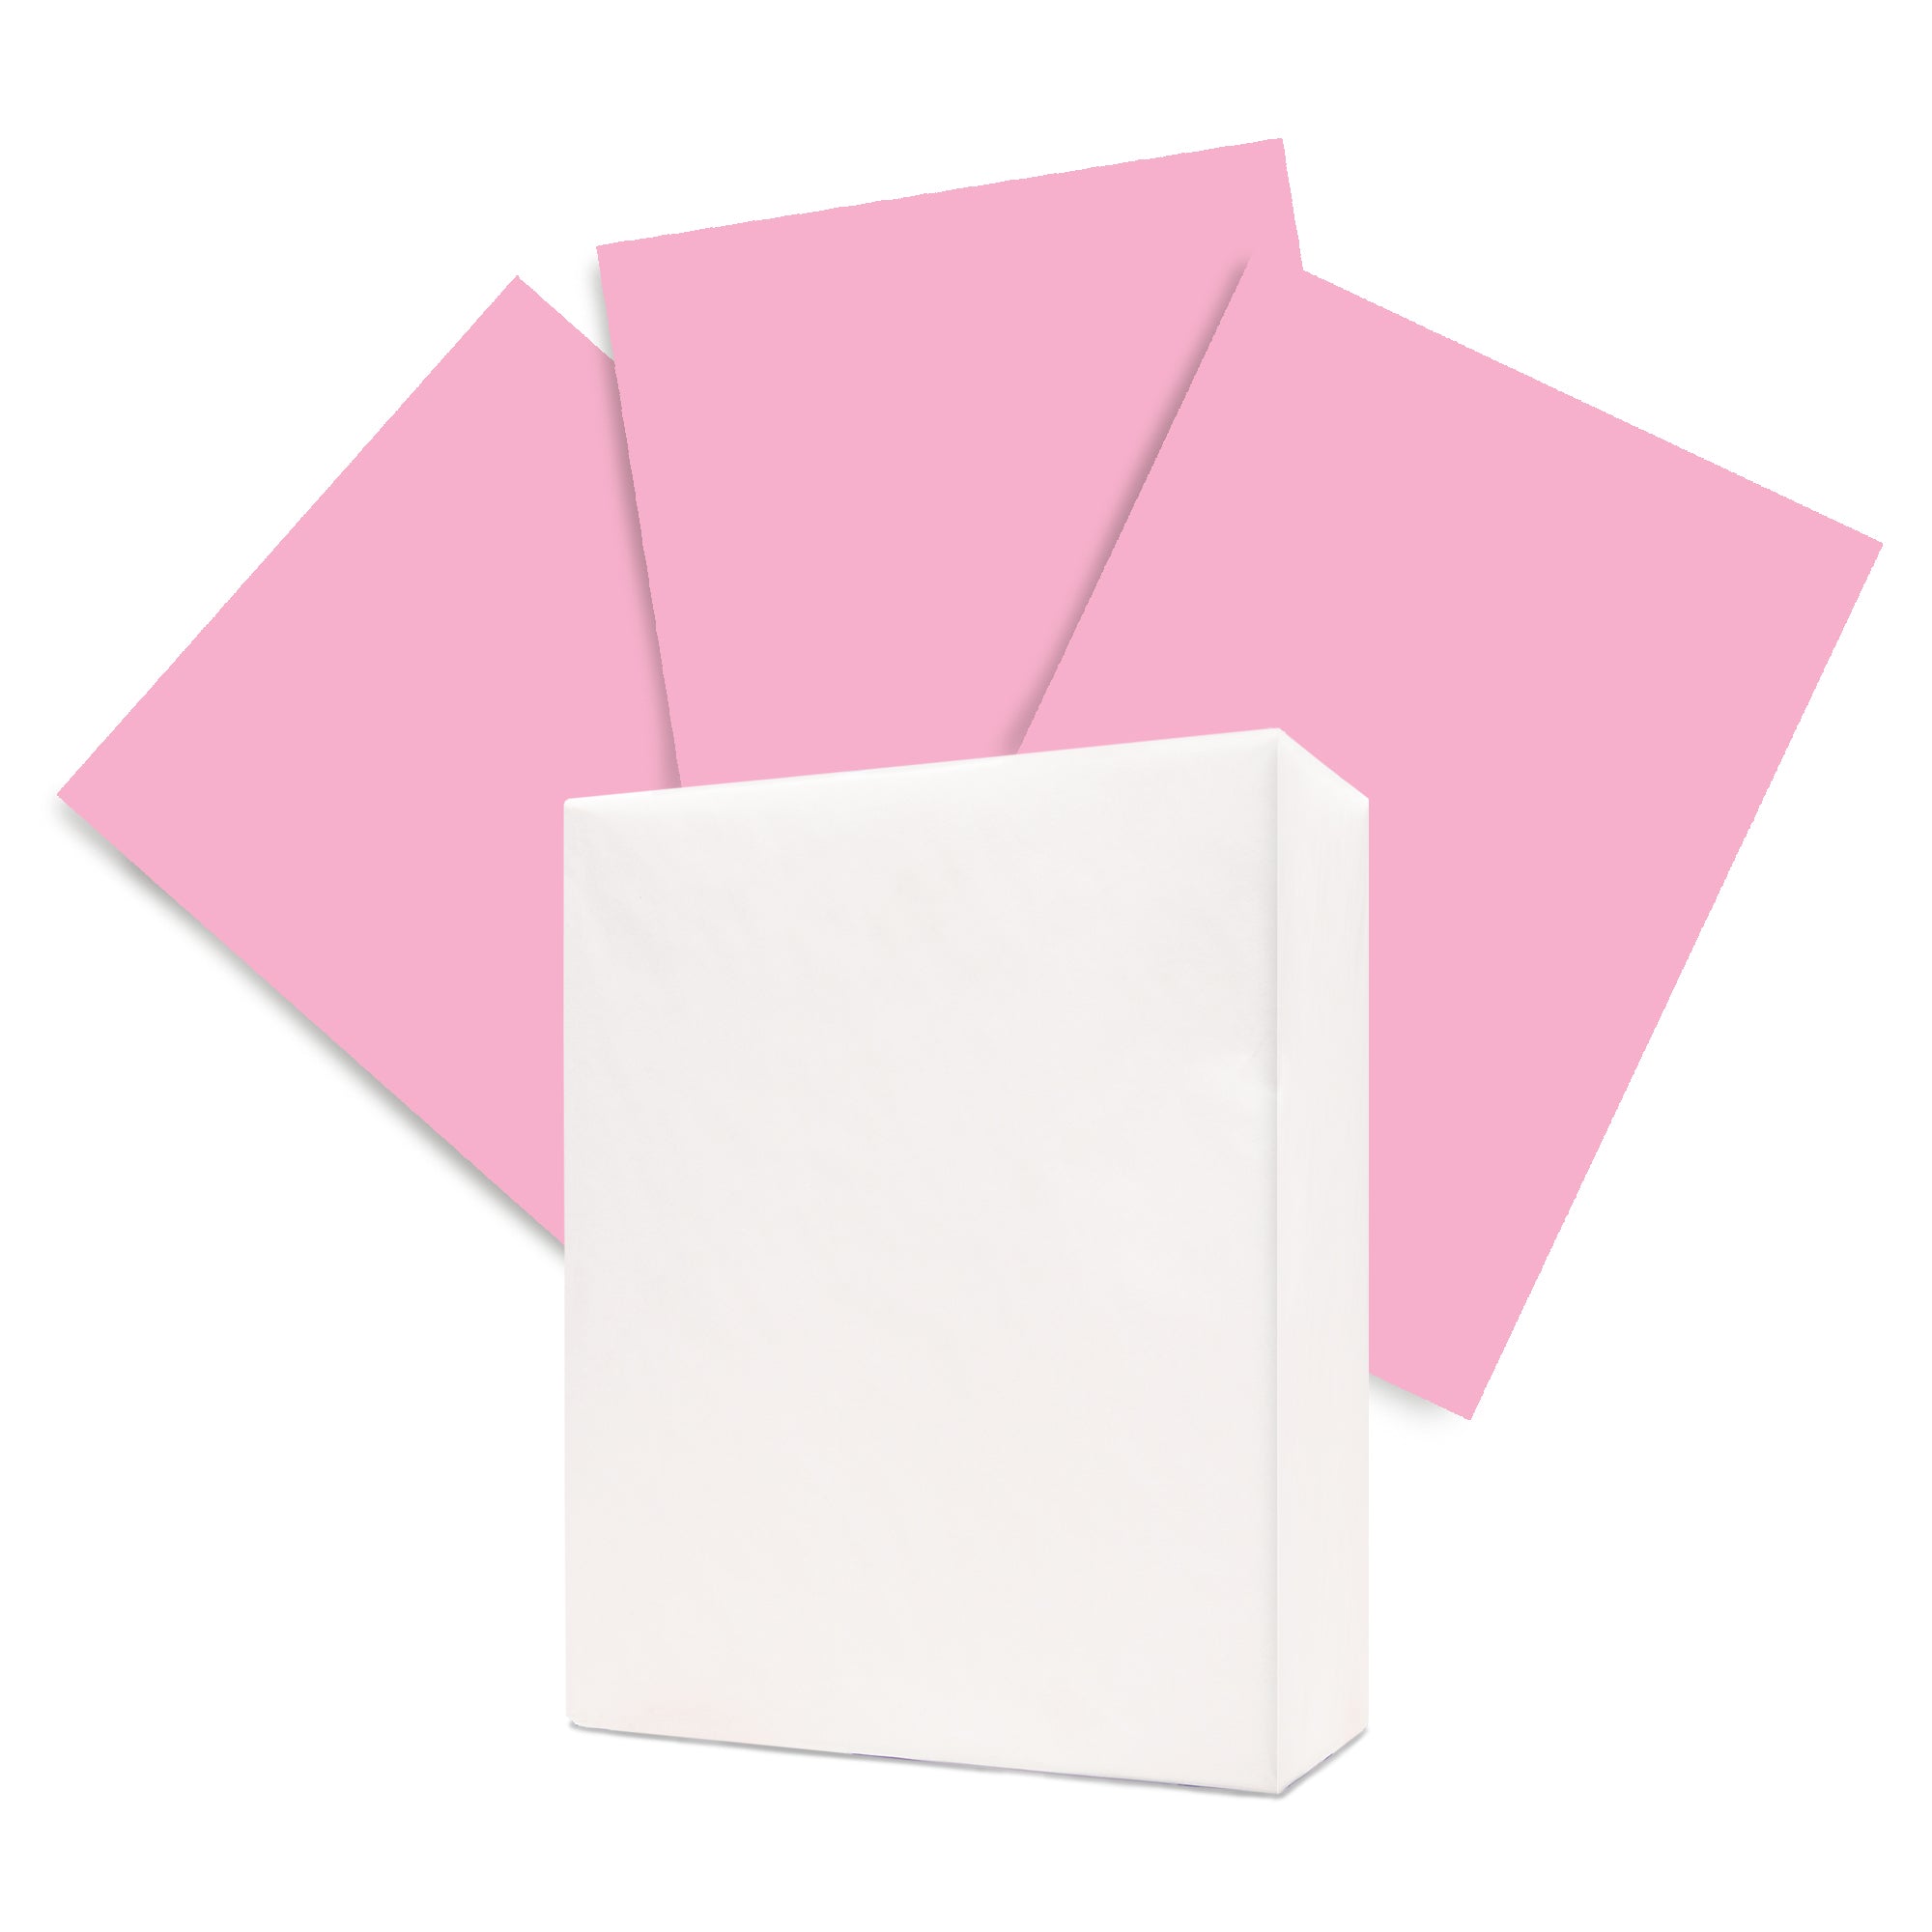 Eagle Color (30% PCW) 8.5 x 11 Pink Colored Copy Paper (500 Sheets/Ream) 1 Ream